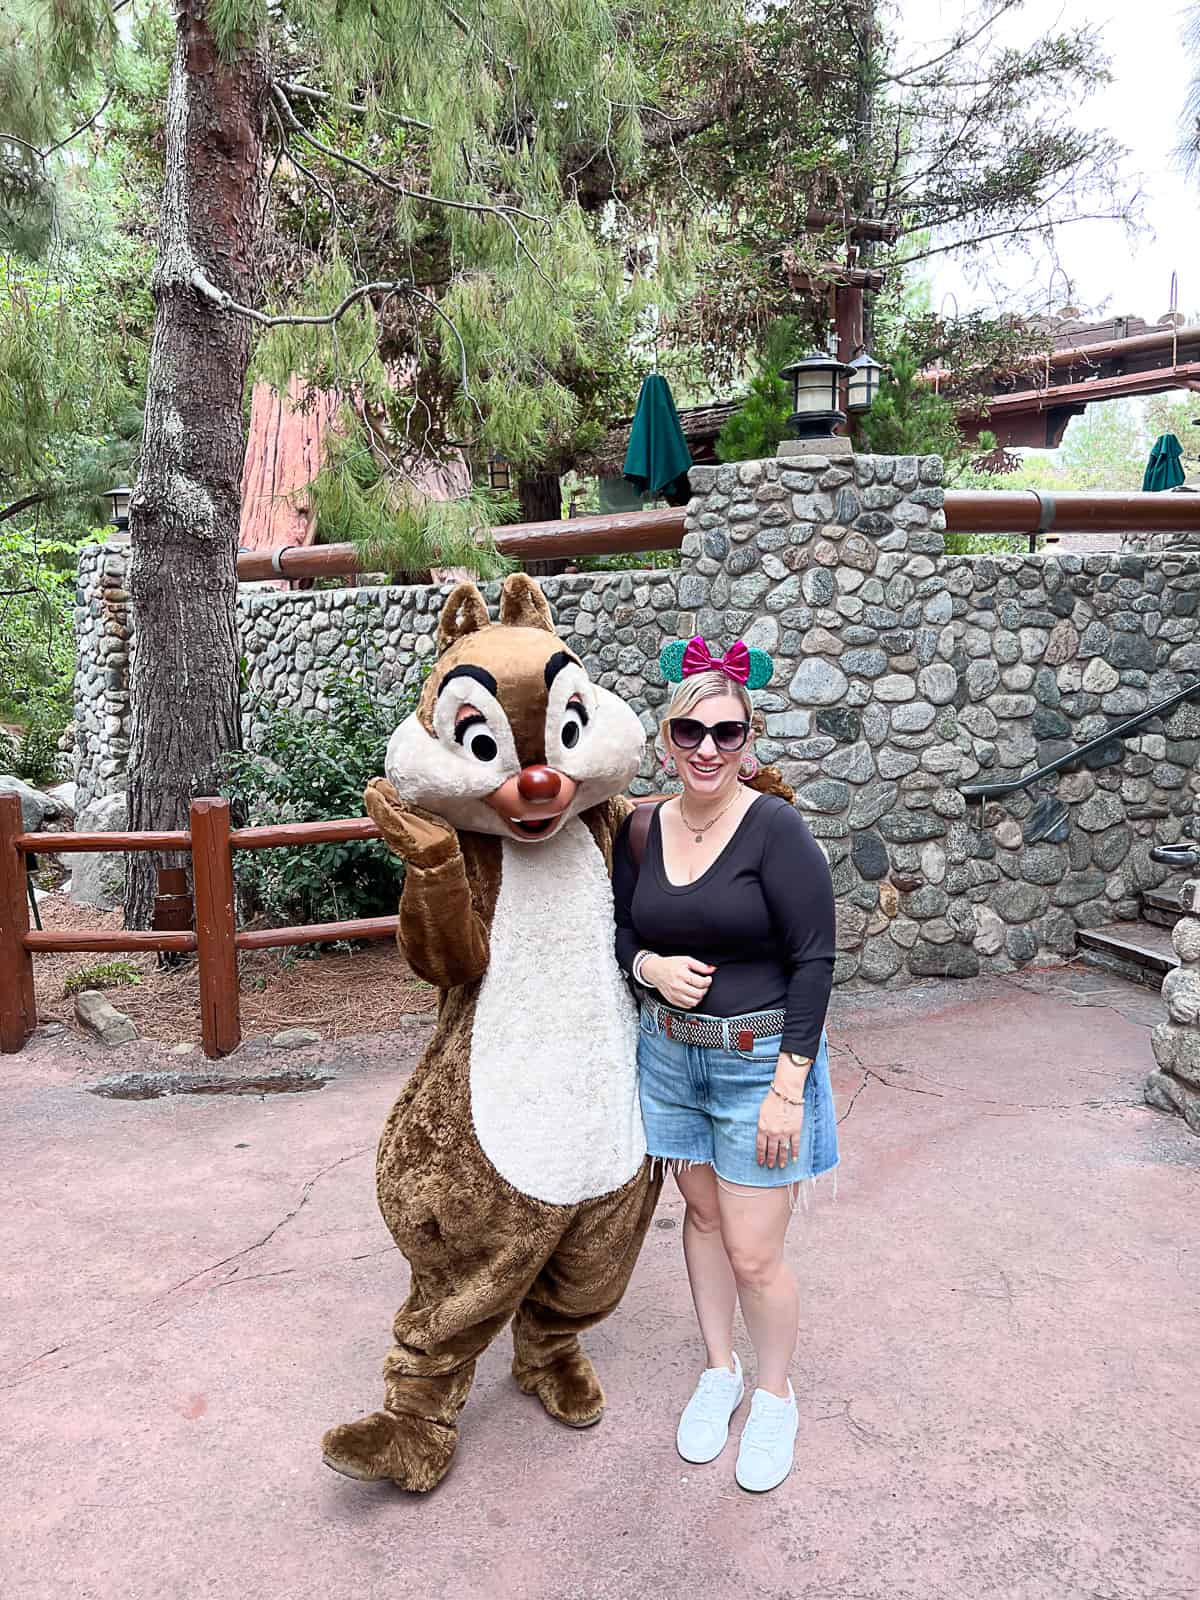 Disneyland Fashion Blogger Jenna Passaro wearing a casual womens style to the park with Dale chipmunk character